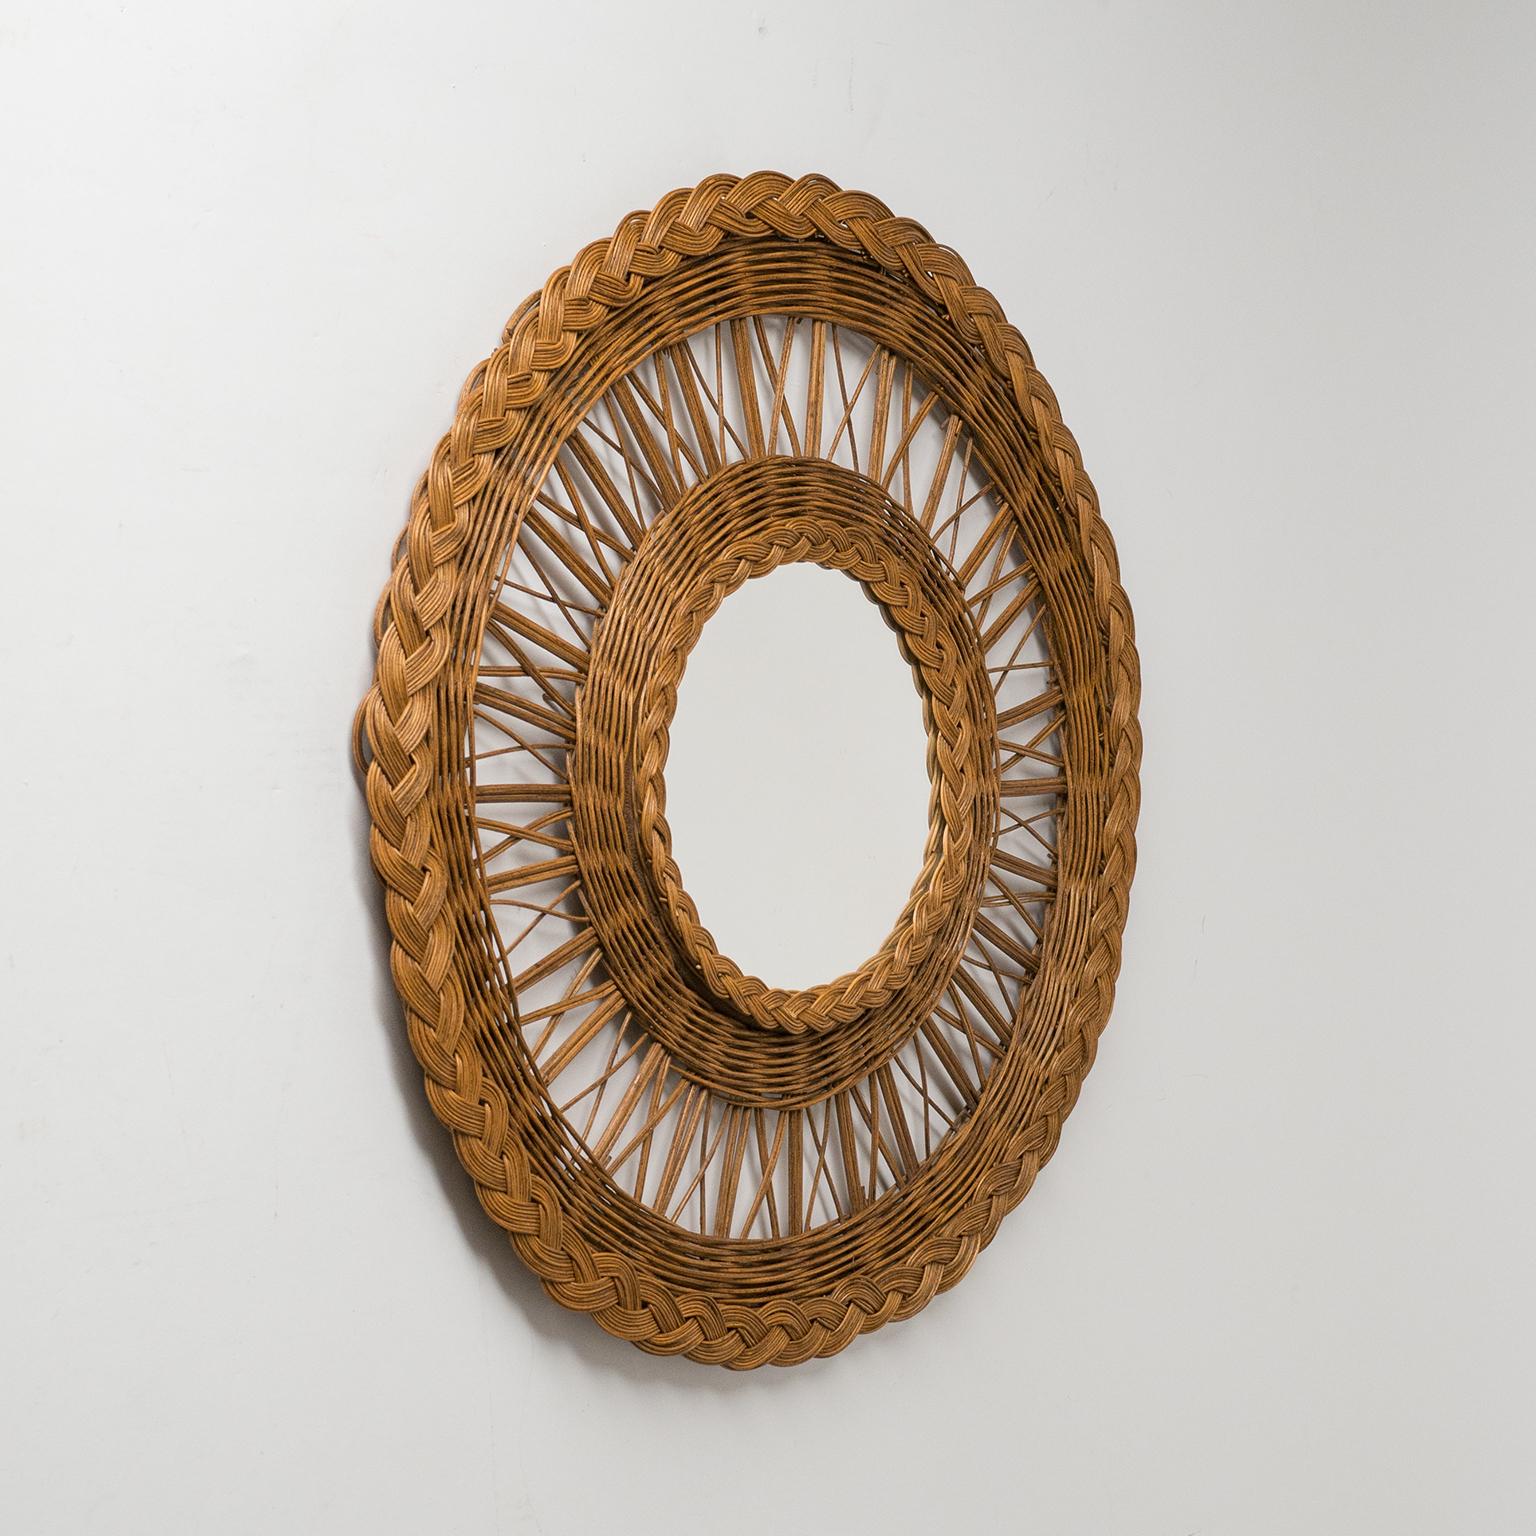 Lovely French midcentury rattan mirror from the 1960s. Rare wheel-shaped design with varying weaving patterns and a nice attention to details. Mirror diameter is 7inches/18cm.